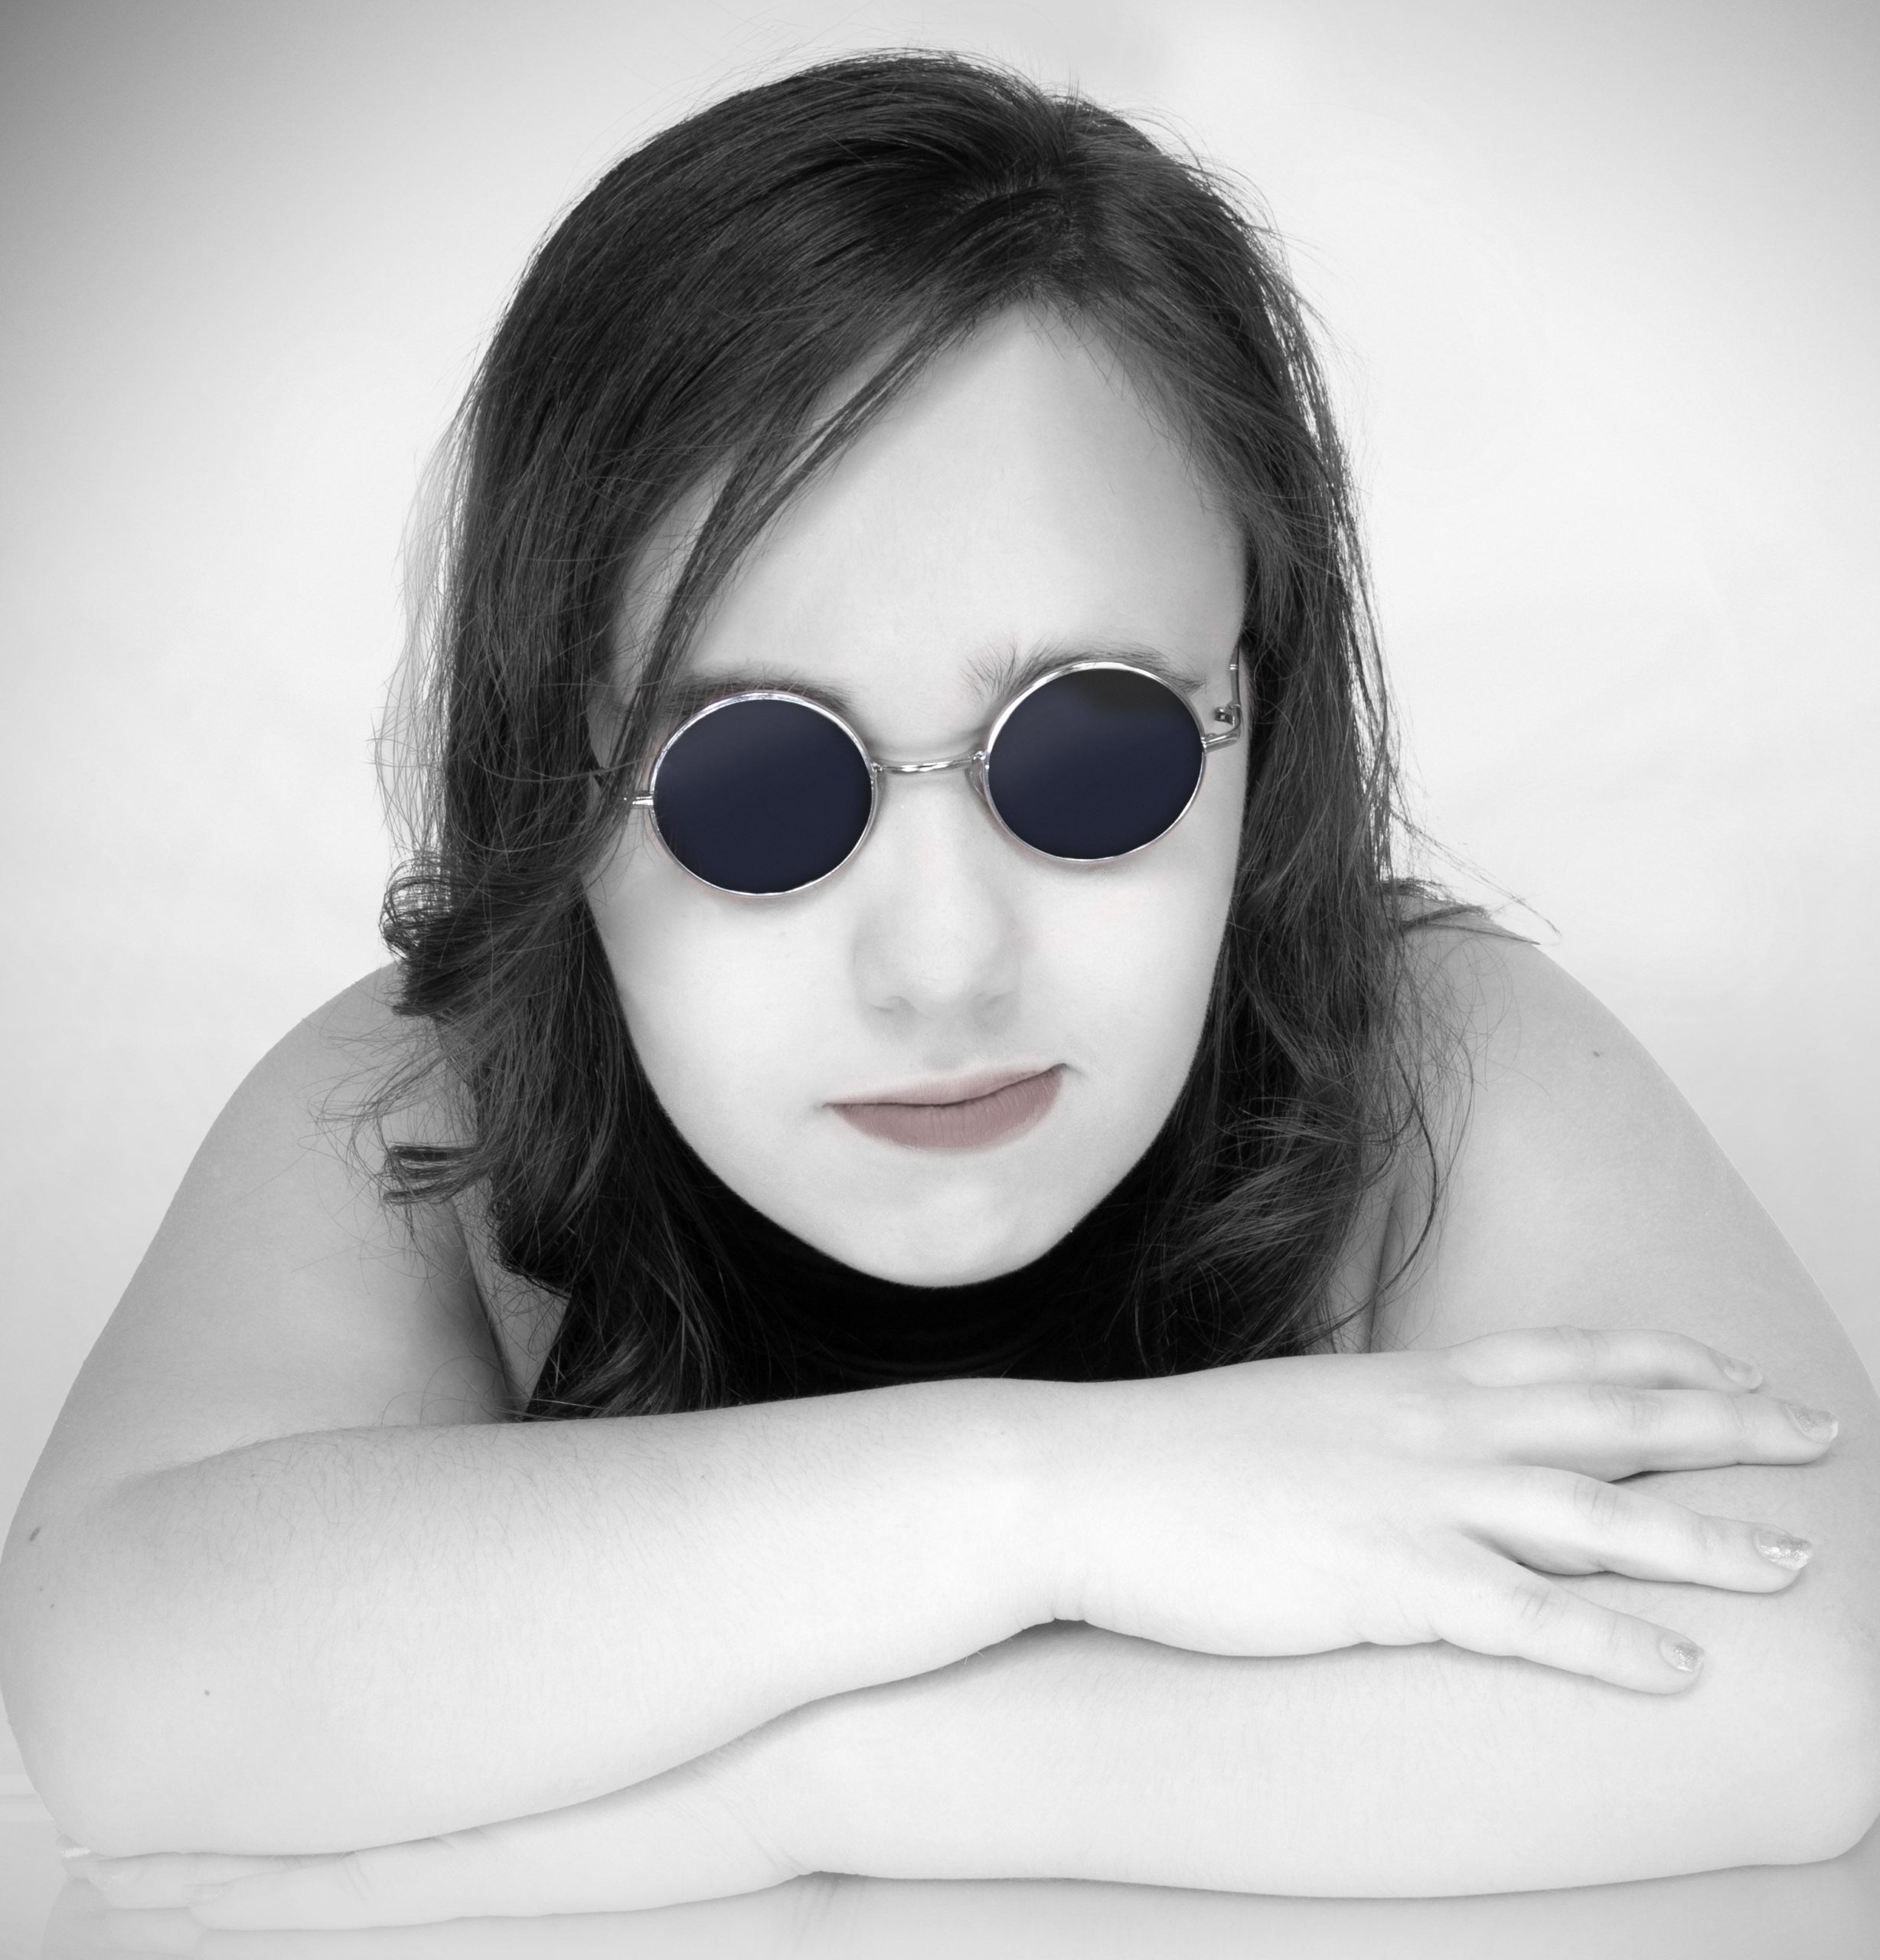 Black and White head shot of Angelina with her chin resting on her arms that are crossed in front of her.  She is wearing John Lennon-style circle sunglasses and a black dress.